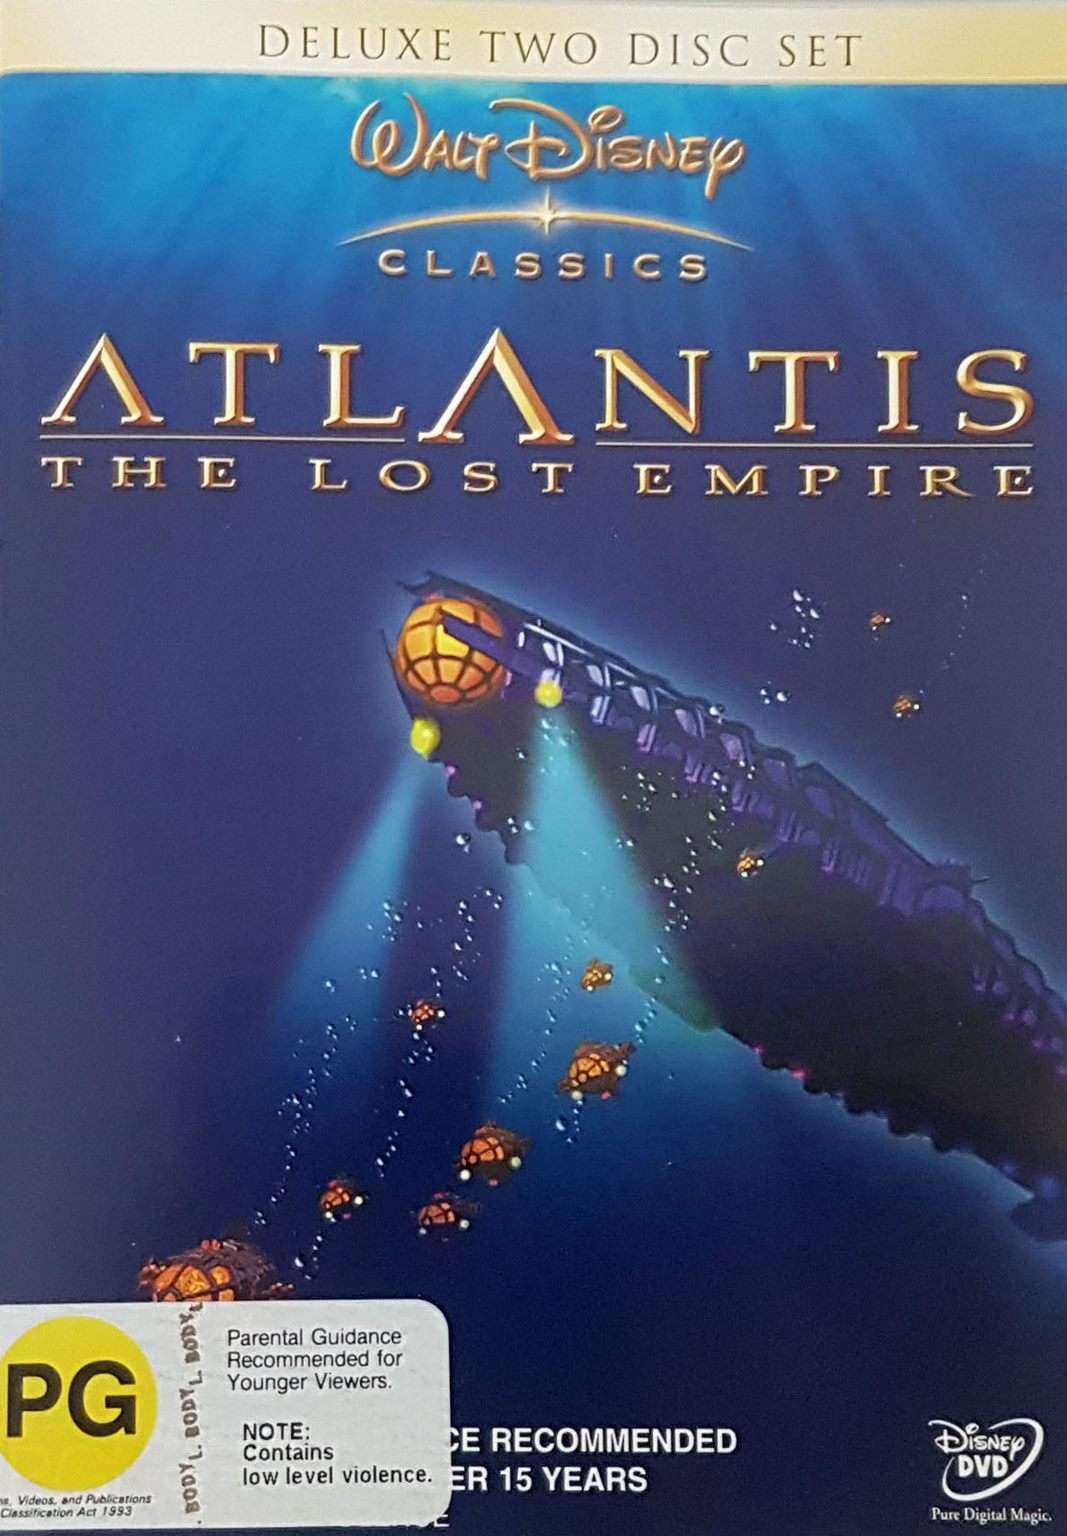 Atlantis: The Lost Empire Two Disc Deluxe Set